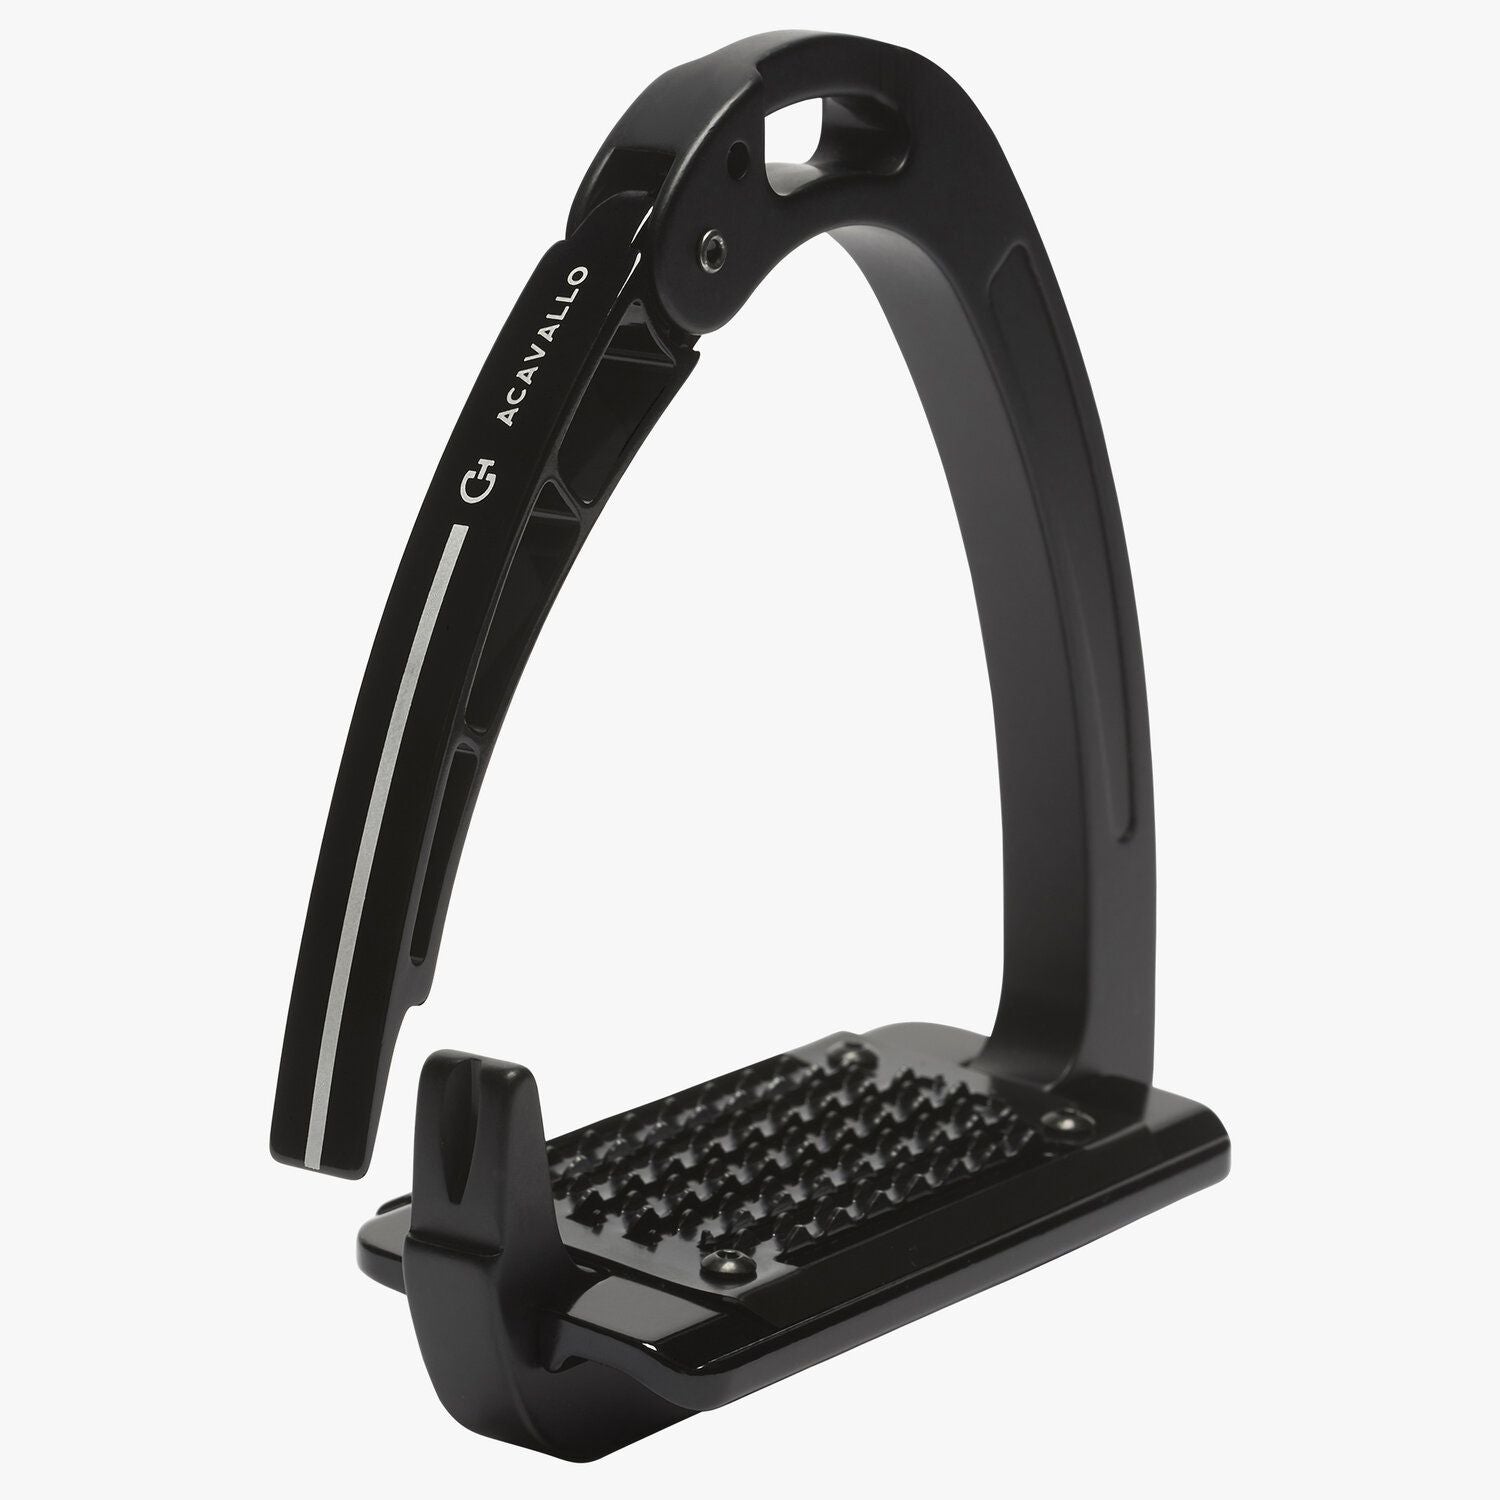 "Stirrups for riding, made of aluminum, while the opening arm is made of a special polyamide material with a platform made of stainless steel.Unique locking and unlocking mechanism, located between the lower end of the outer pivot arm and the footplate. Simple and reliable ""one-click"" re-engagement of the locking mechanism and release of the bracket once activated."